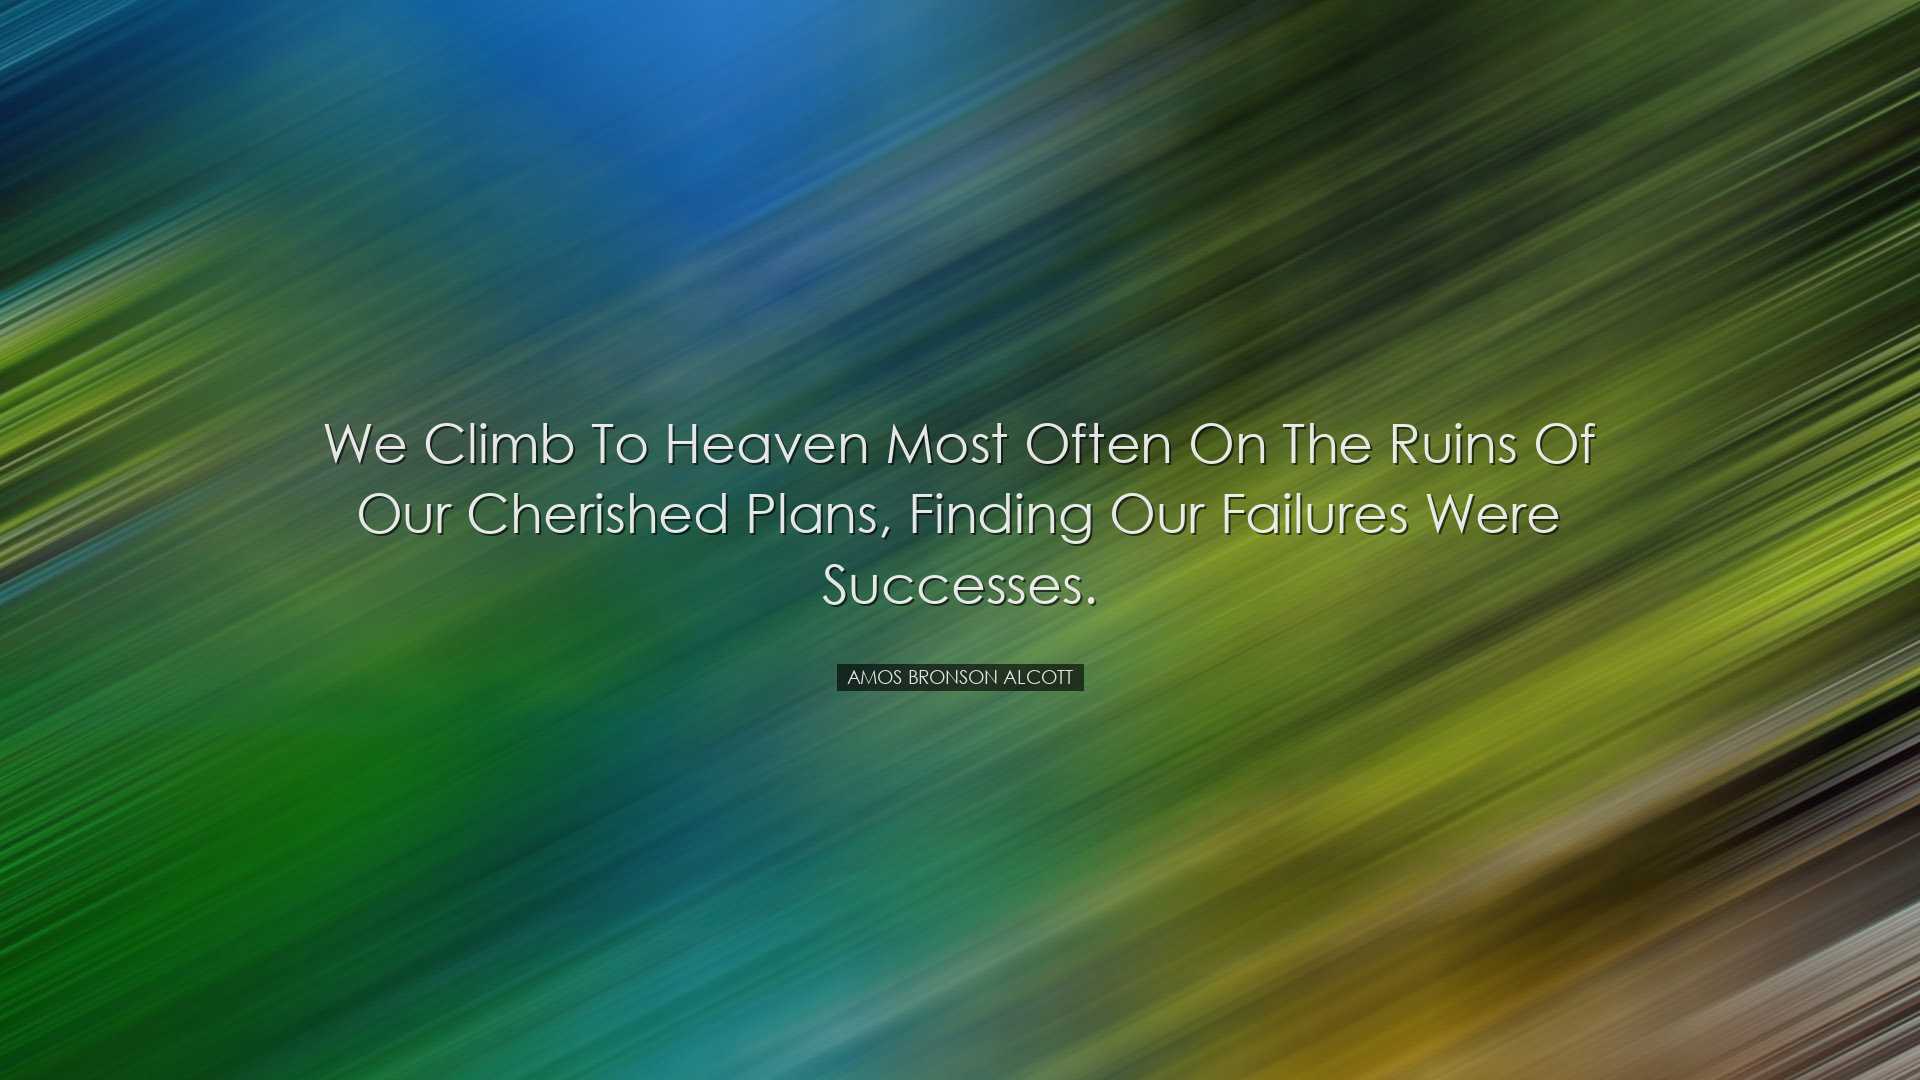 We climb to heaven most often on the ruins of our cherished plans,